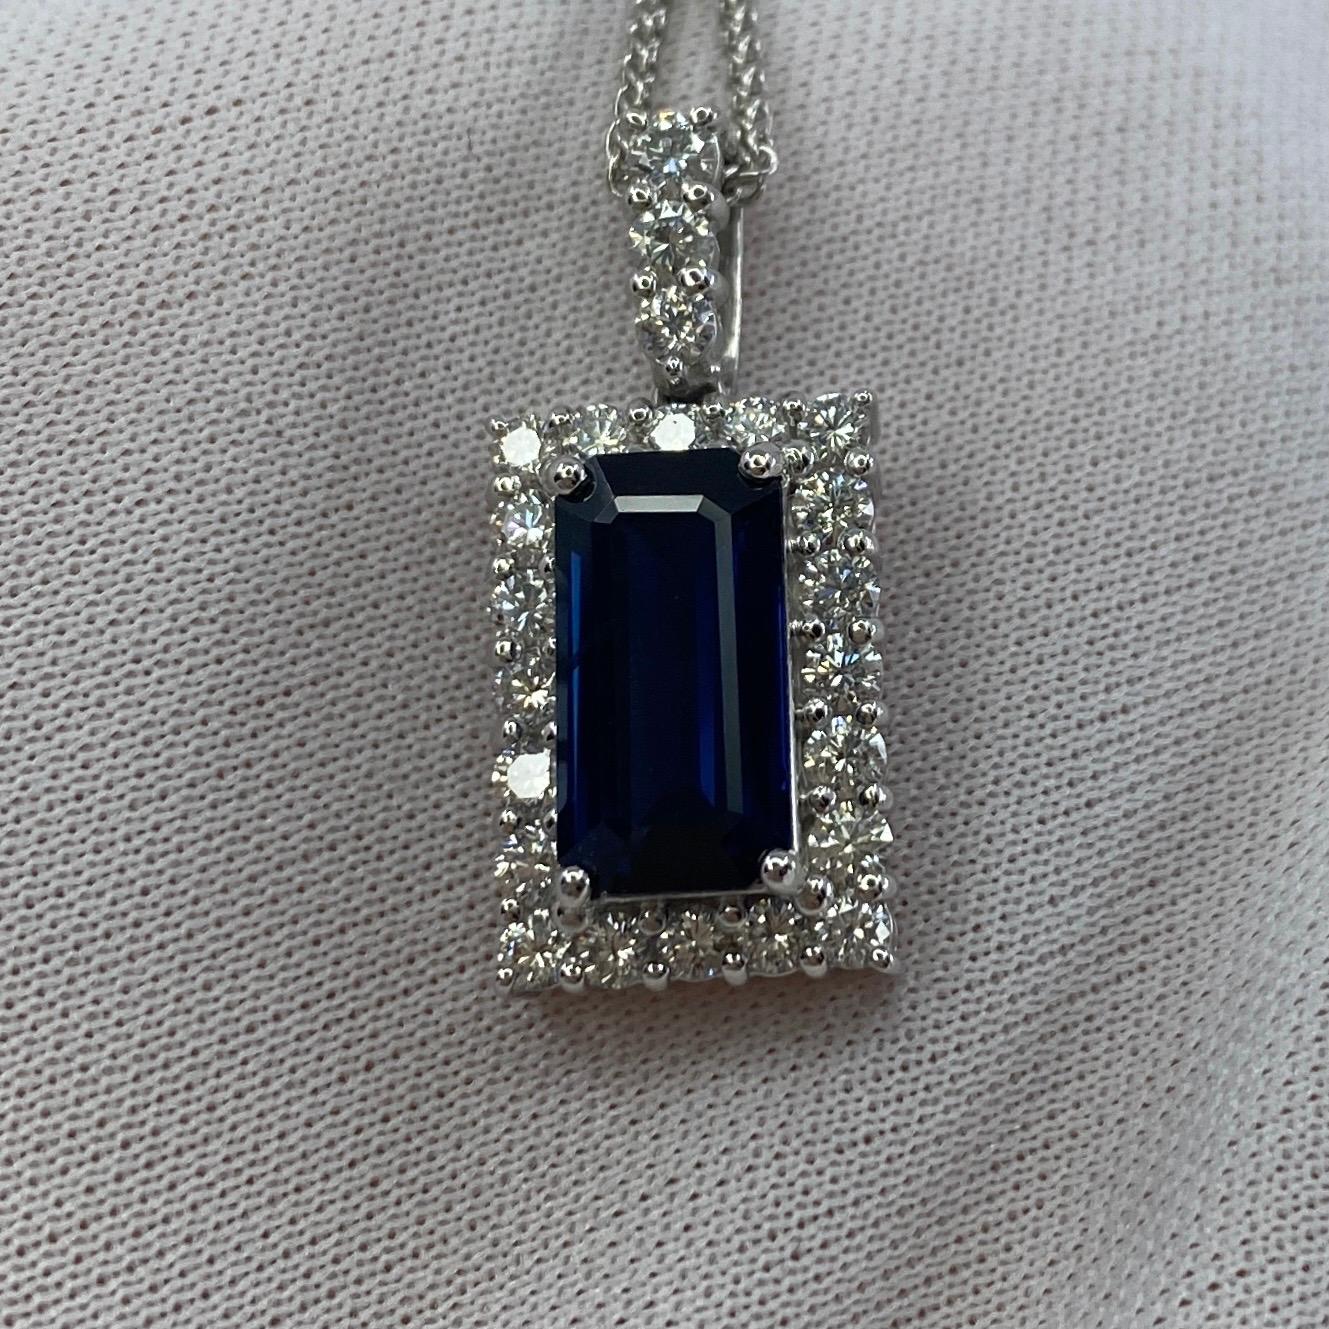 4.65 Total Carat Fine Royal Blue Sapphire & Diamond Rectangle Platinum Pendant.

3.68 Carat centre sapphire with a fine deep Royal blue colour and excellent clarity, very clean gem, especially for a sapphire of this size. Measuring 12.2x6.4mm. Also